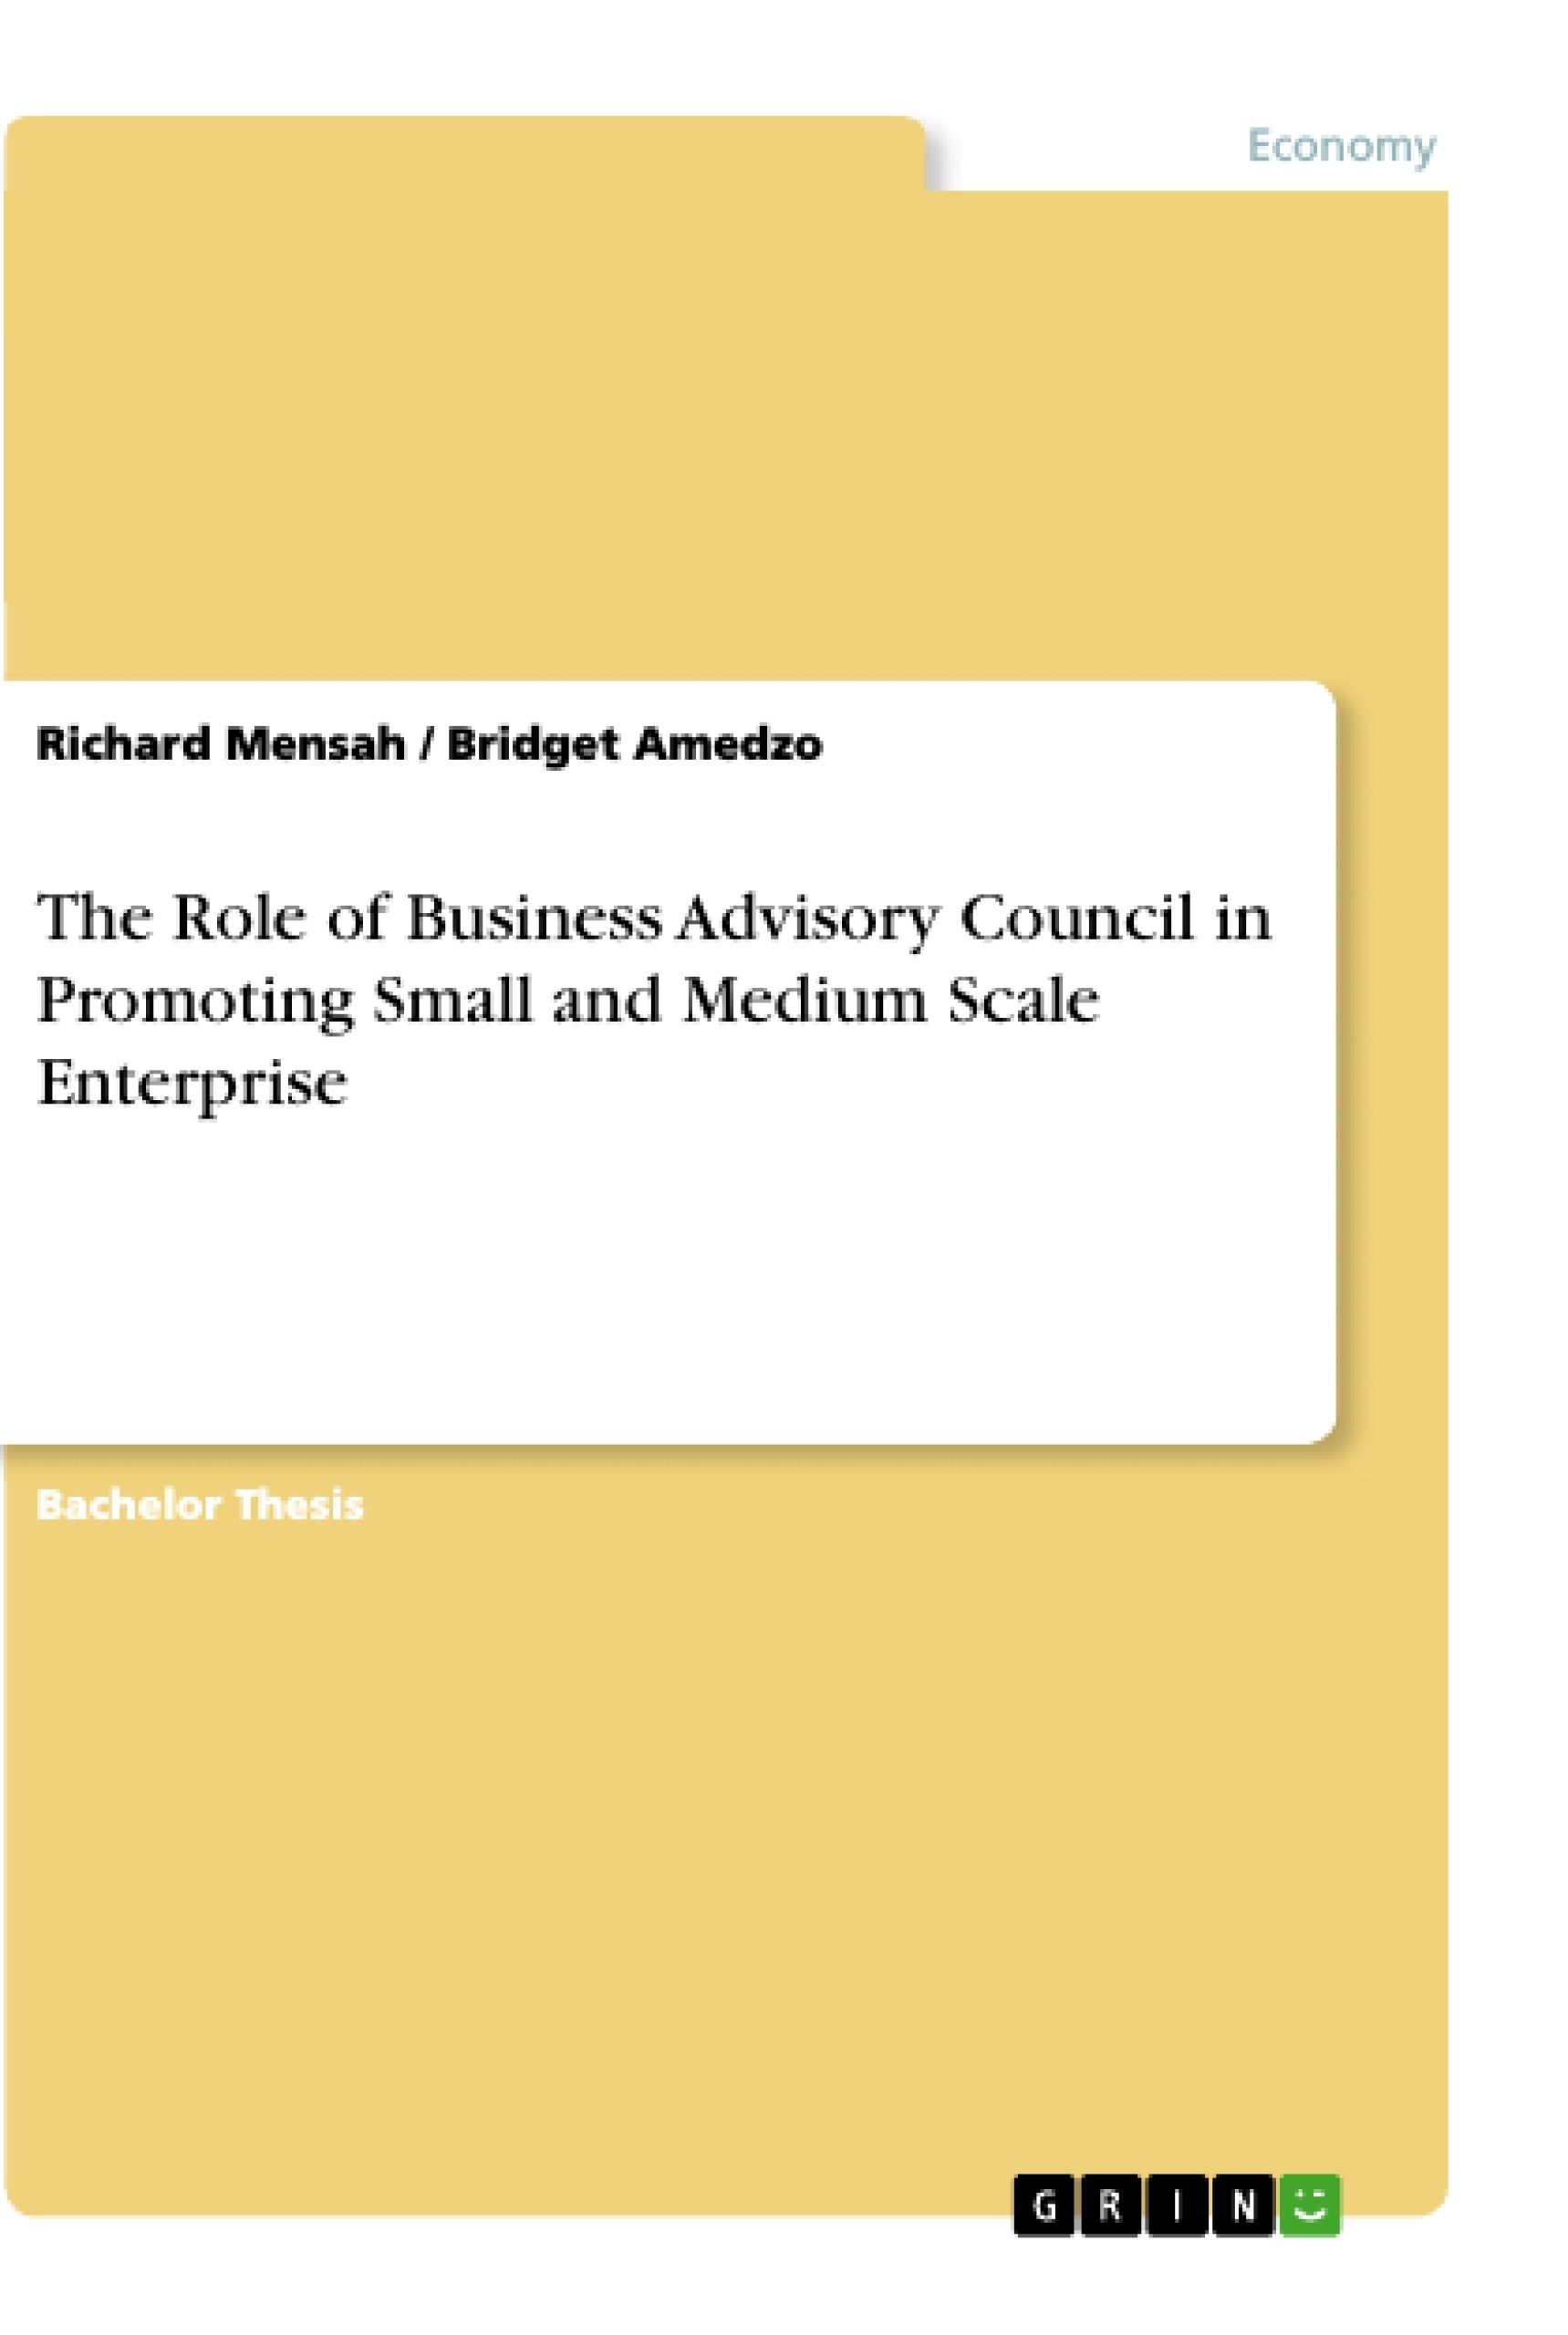 Title: The Role of Business Advisory Council in Promoting Small and Medium Scale Enterprise